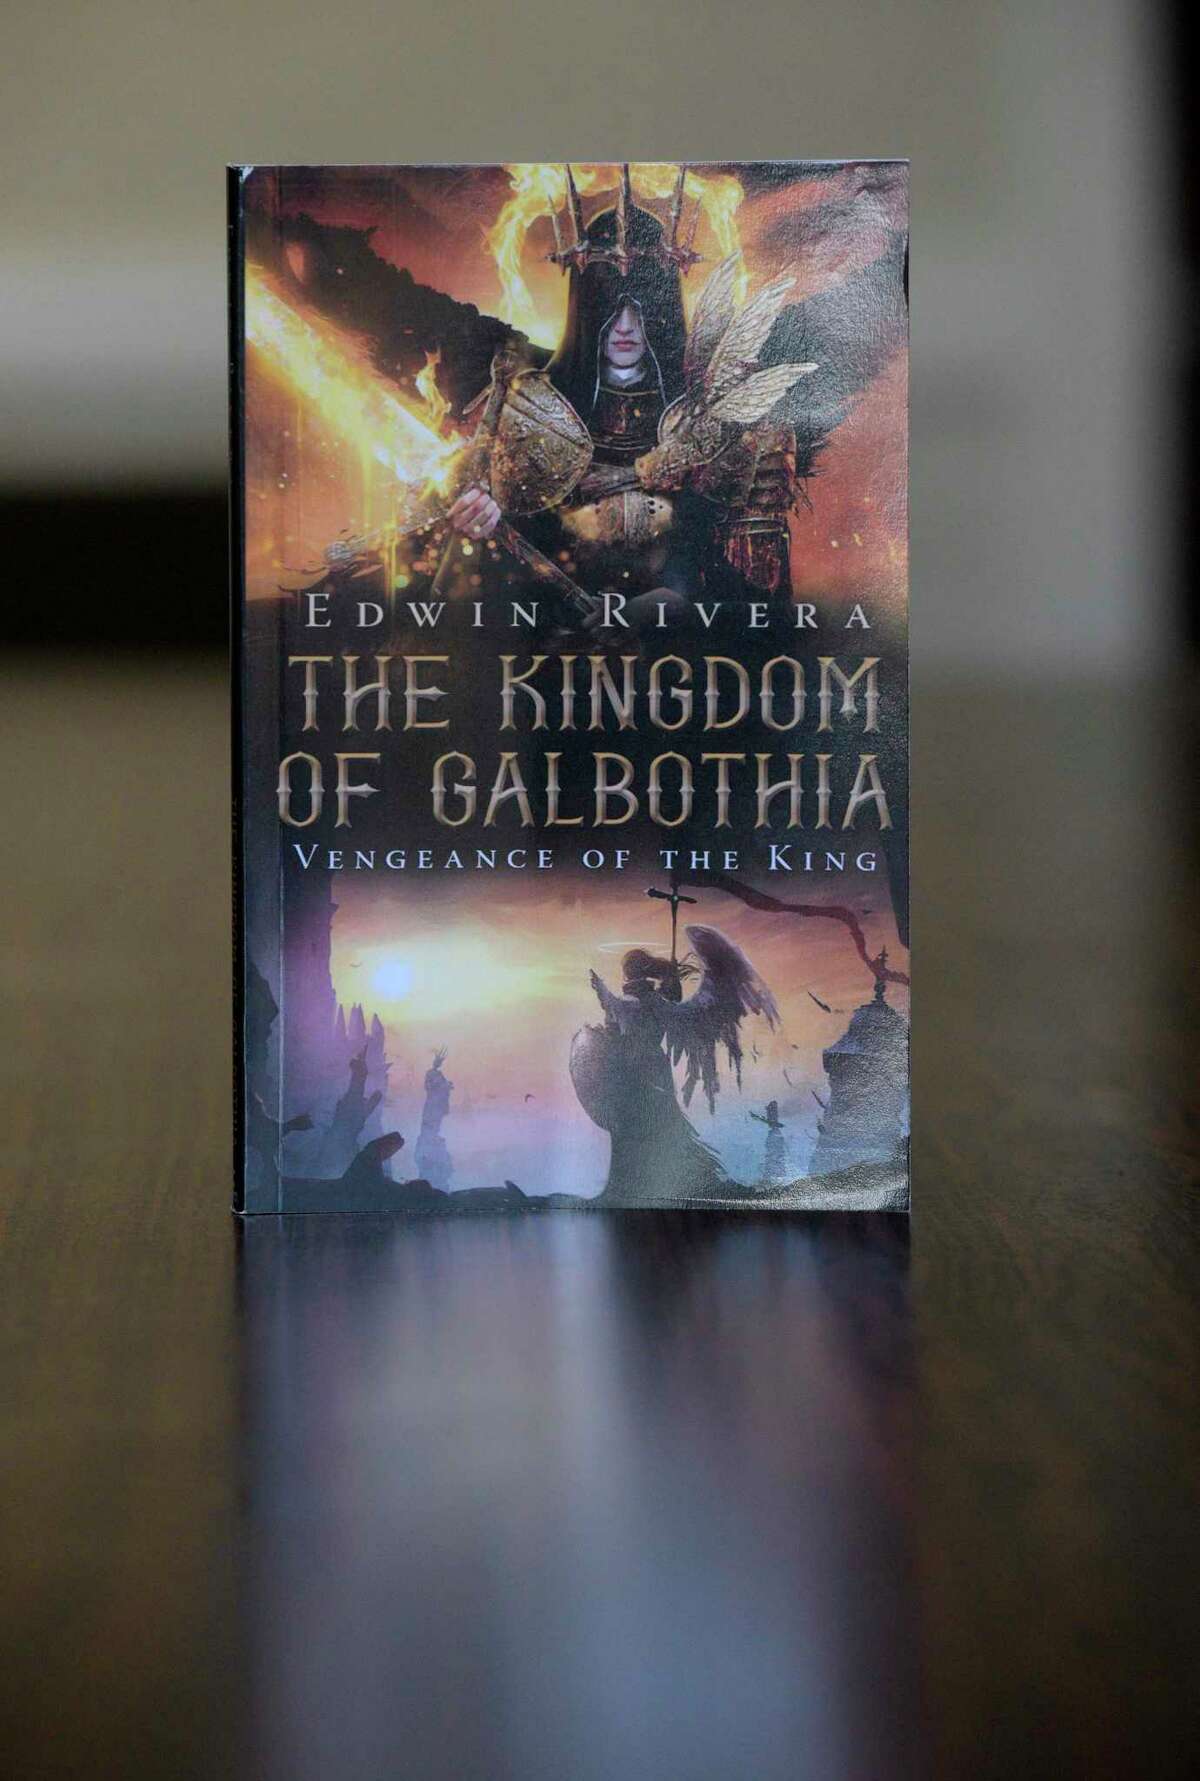 Author Edwin Rivera, of Danbury, latest book, “The Kingdom of Galbothia: Vengeance of the King”, was recently published. Rivera has gotten inspiration for his writing from his years as a bounty hunter. Thursday, November 18, 2021, Danbury, Conn.